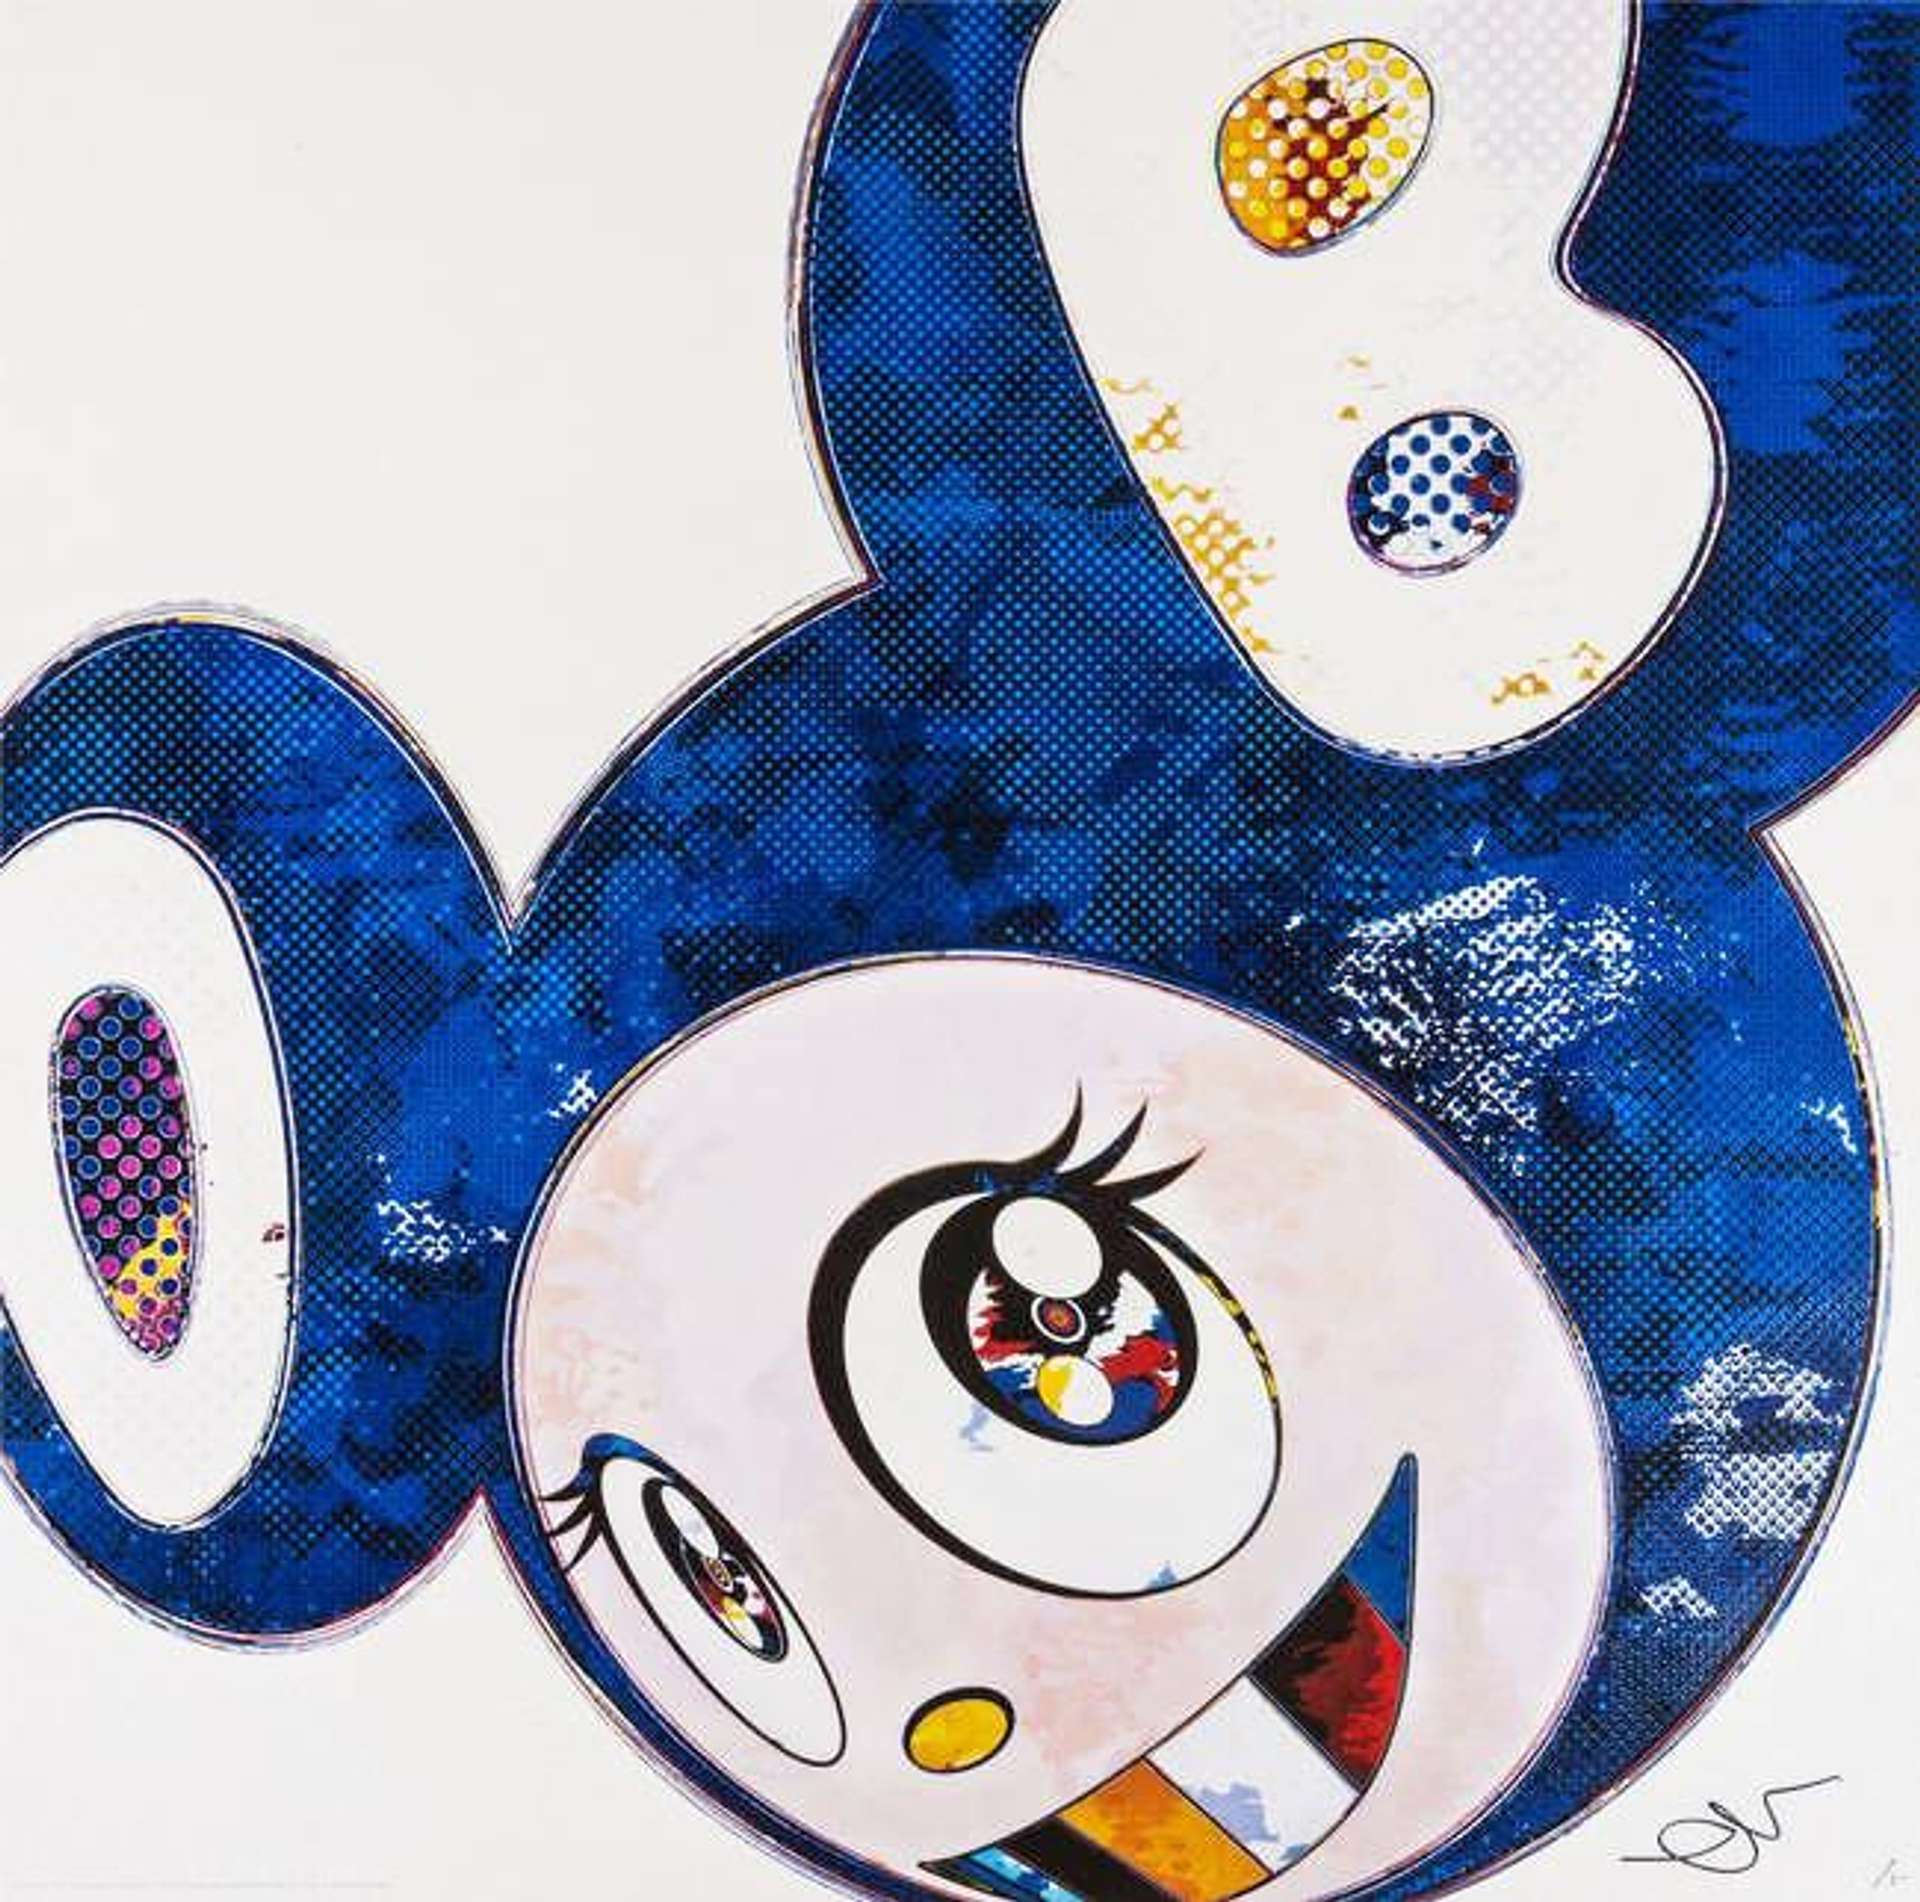 And Then... (blue) by Takashi Murakami